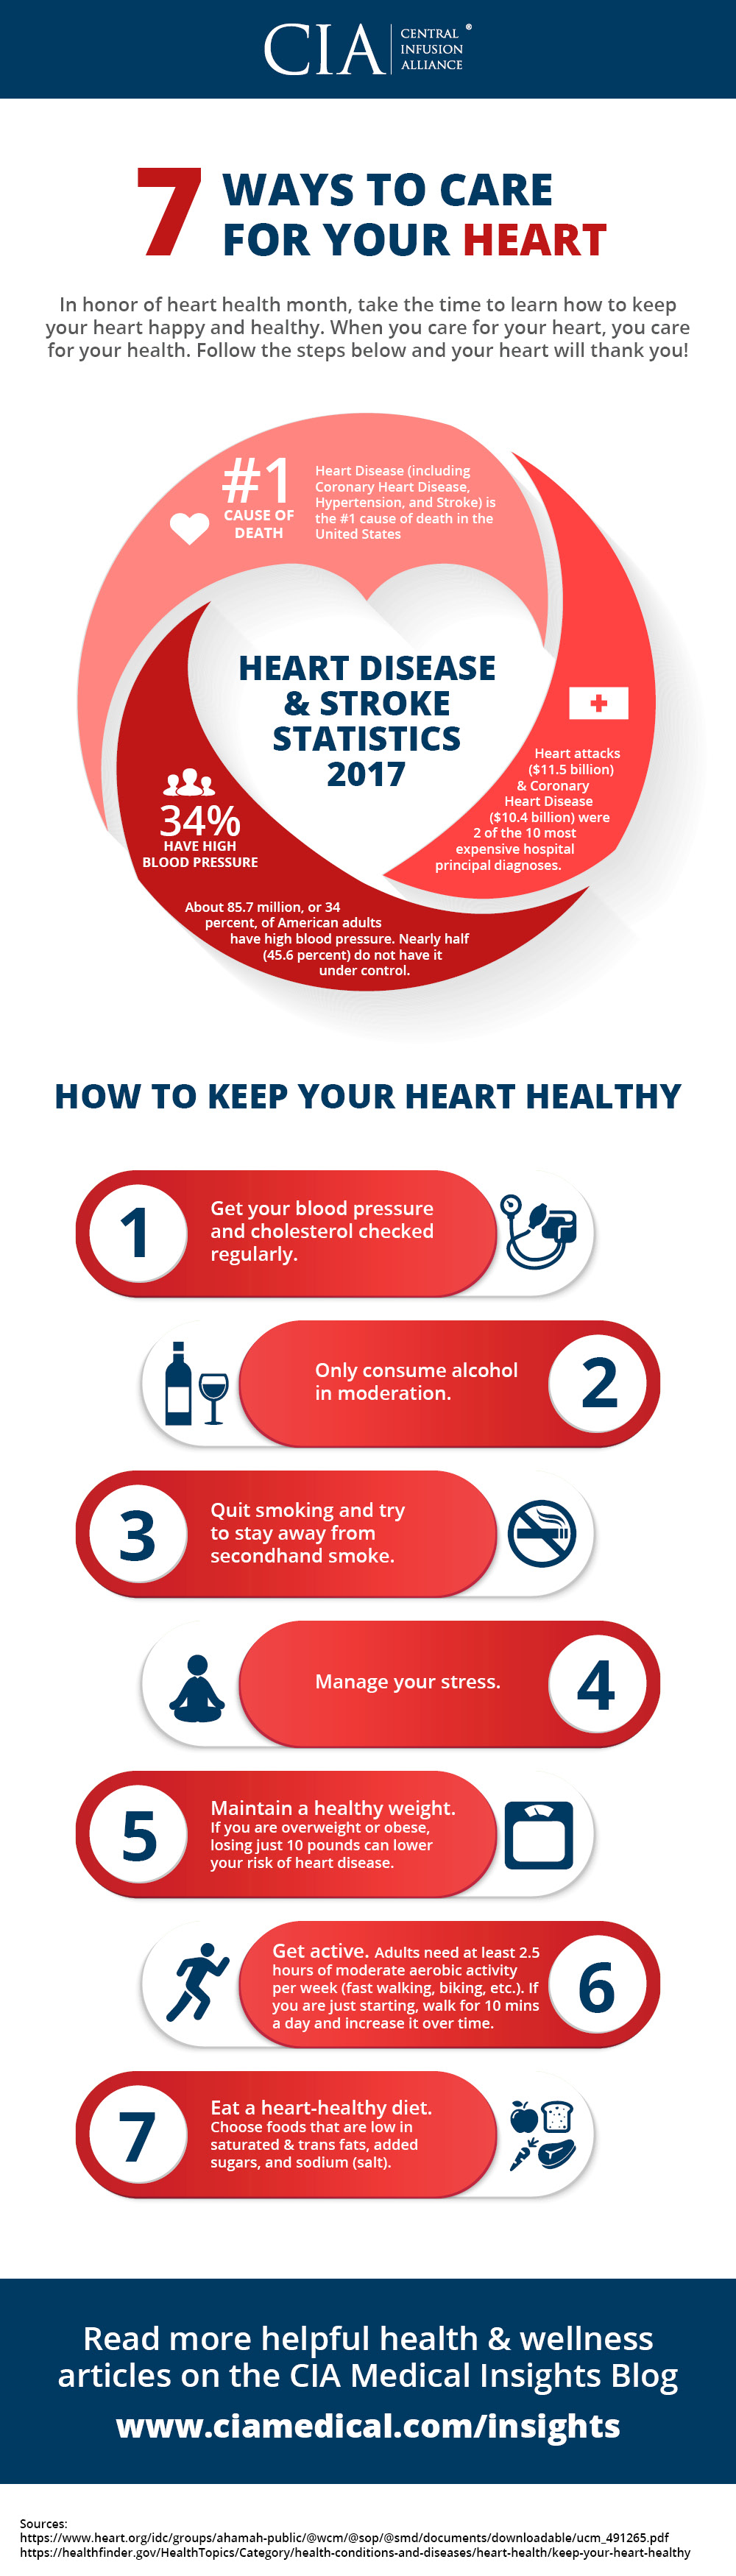 CIA Medical How to Keep Your Heart Healthy